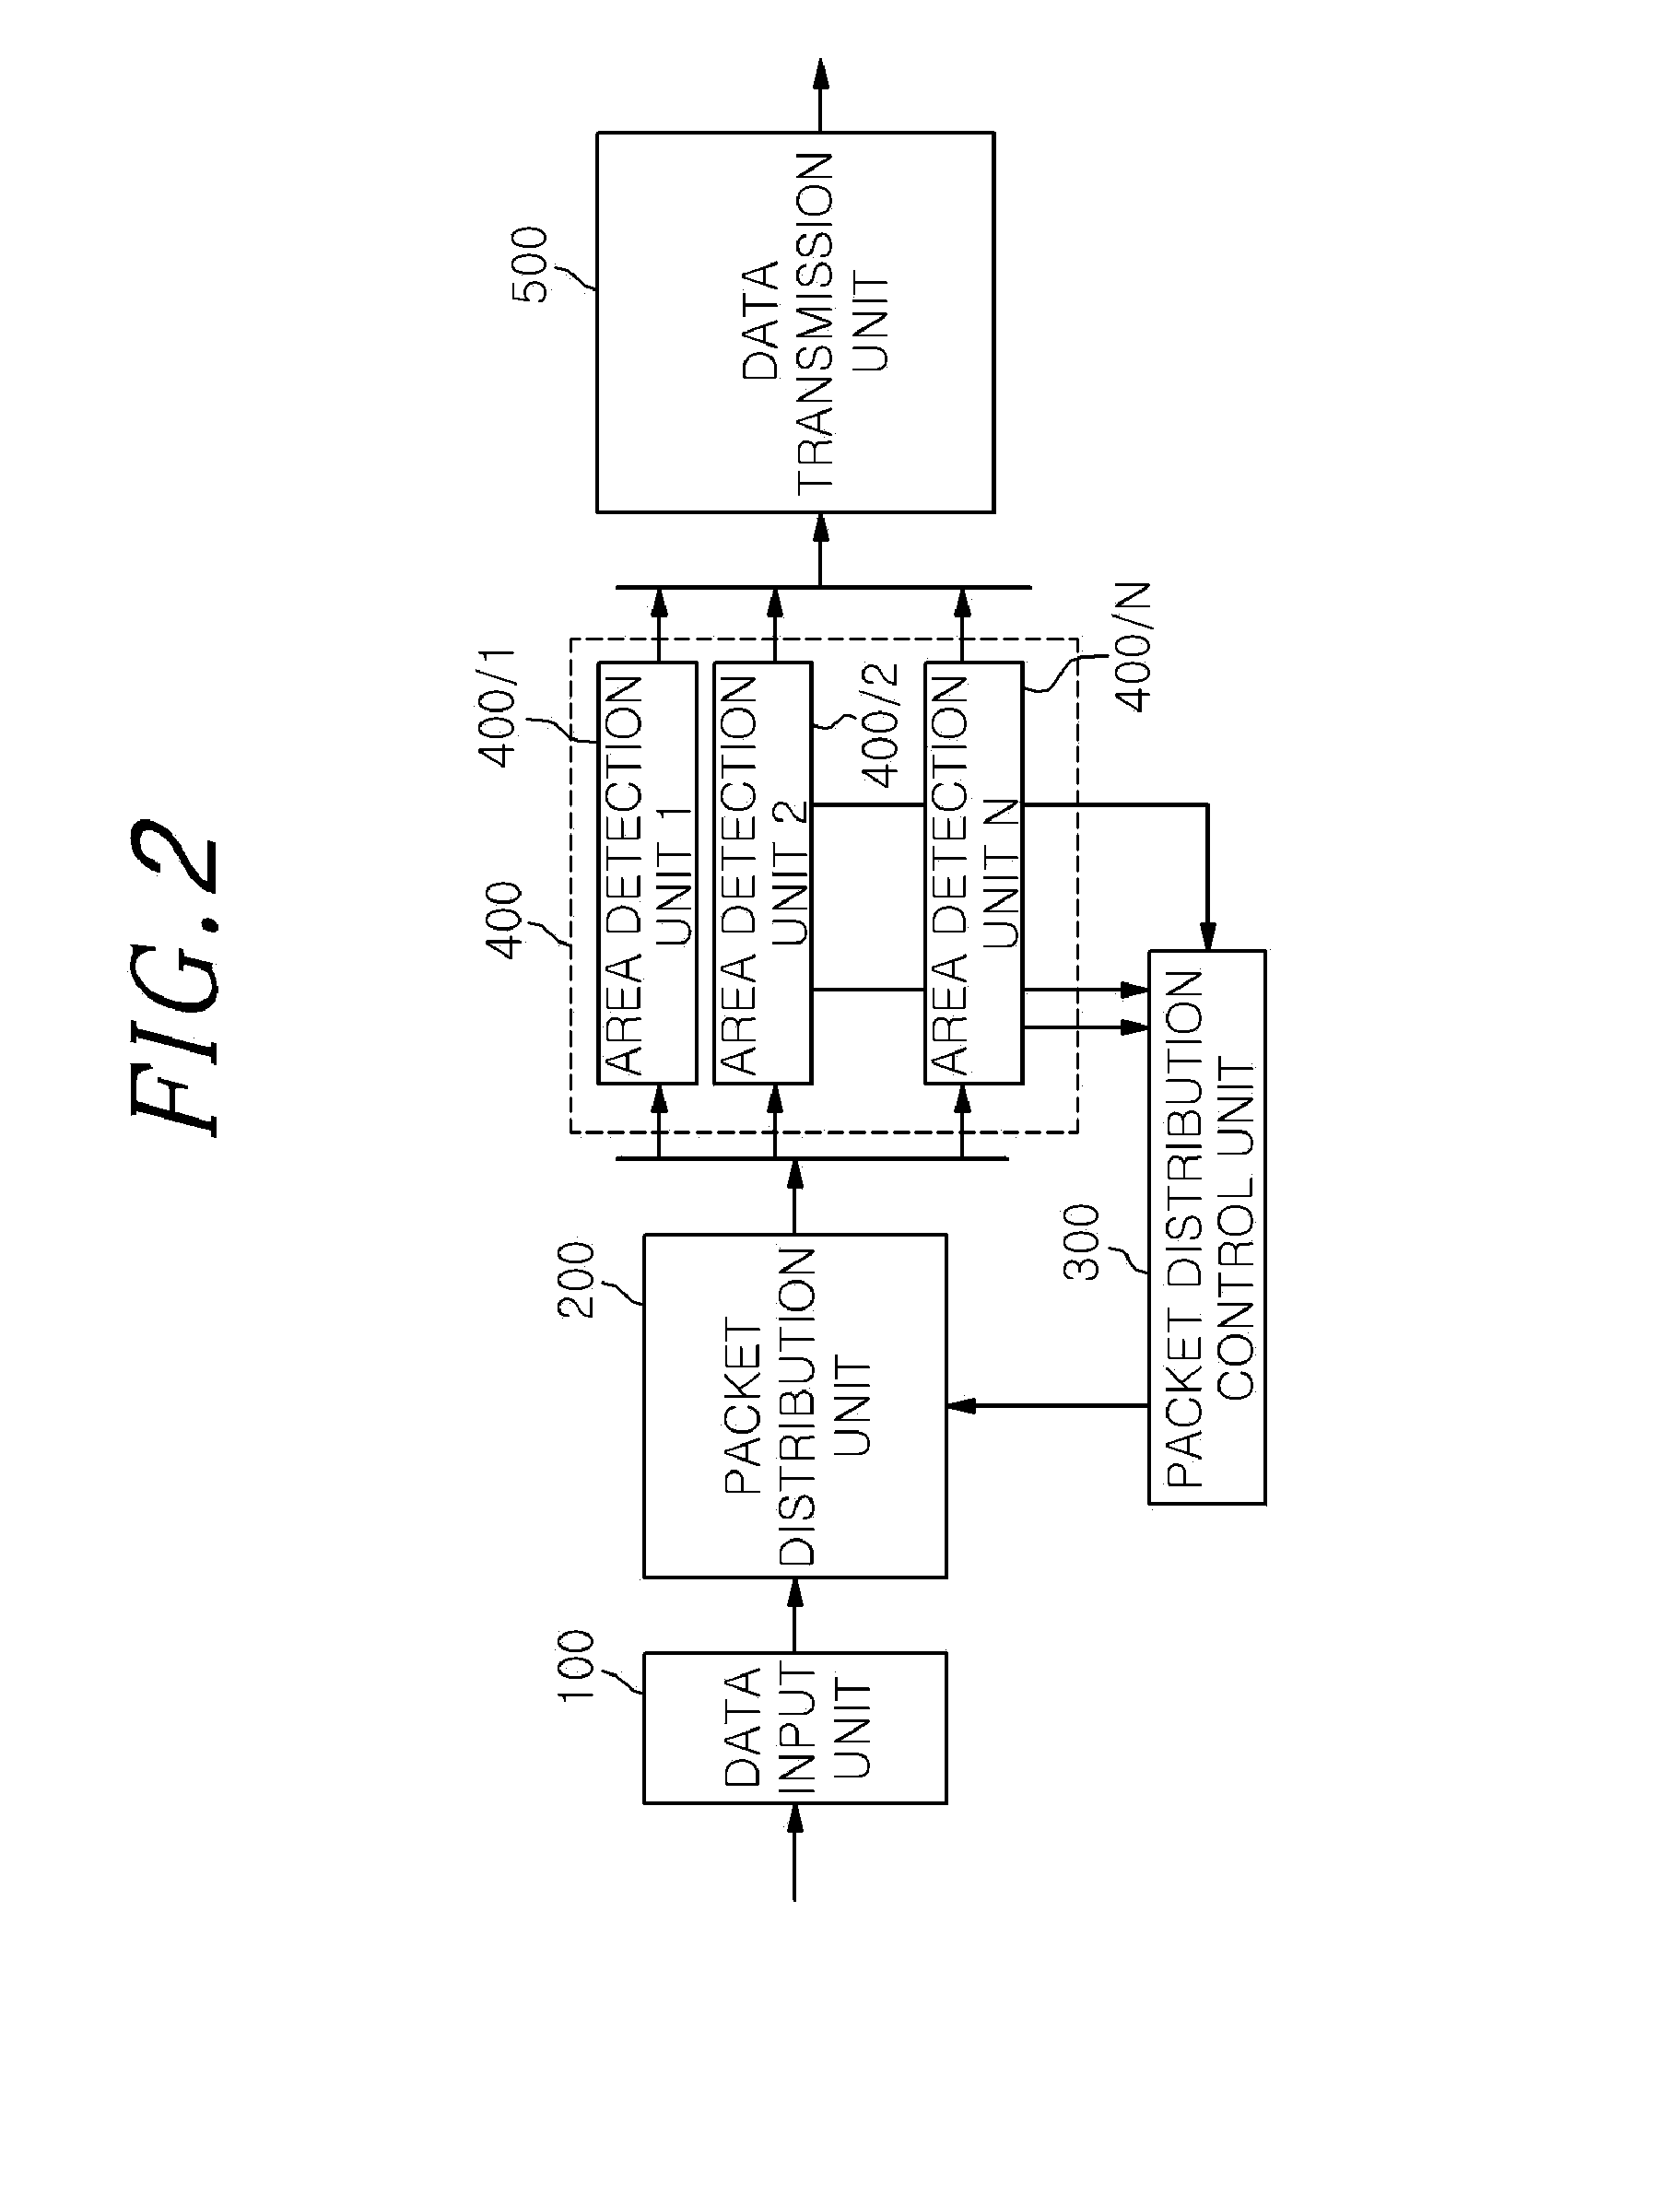 Apparatus and method for providing network data service, client device for network data service